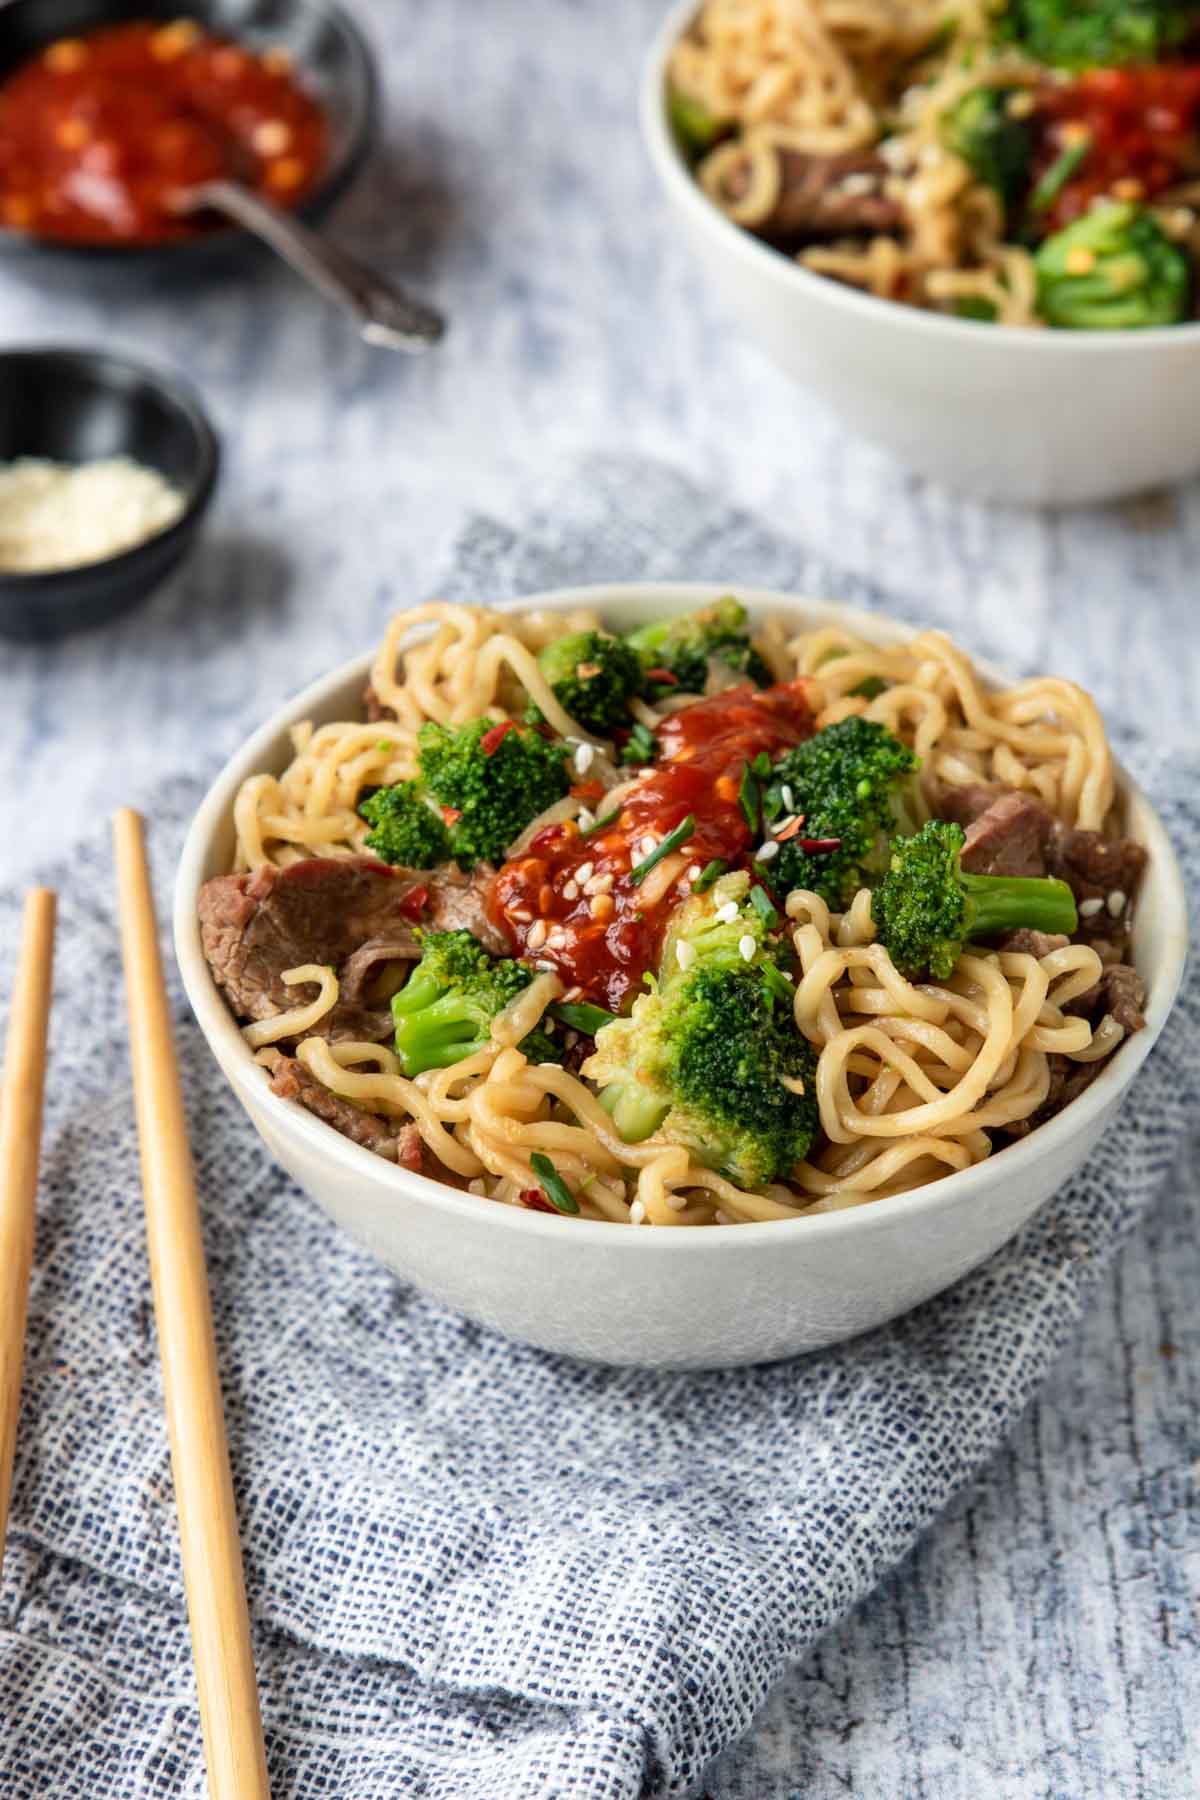 a bowls of ramen noodles with broccoli and beef